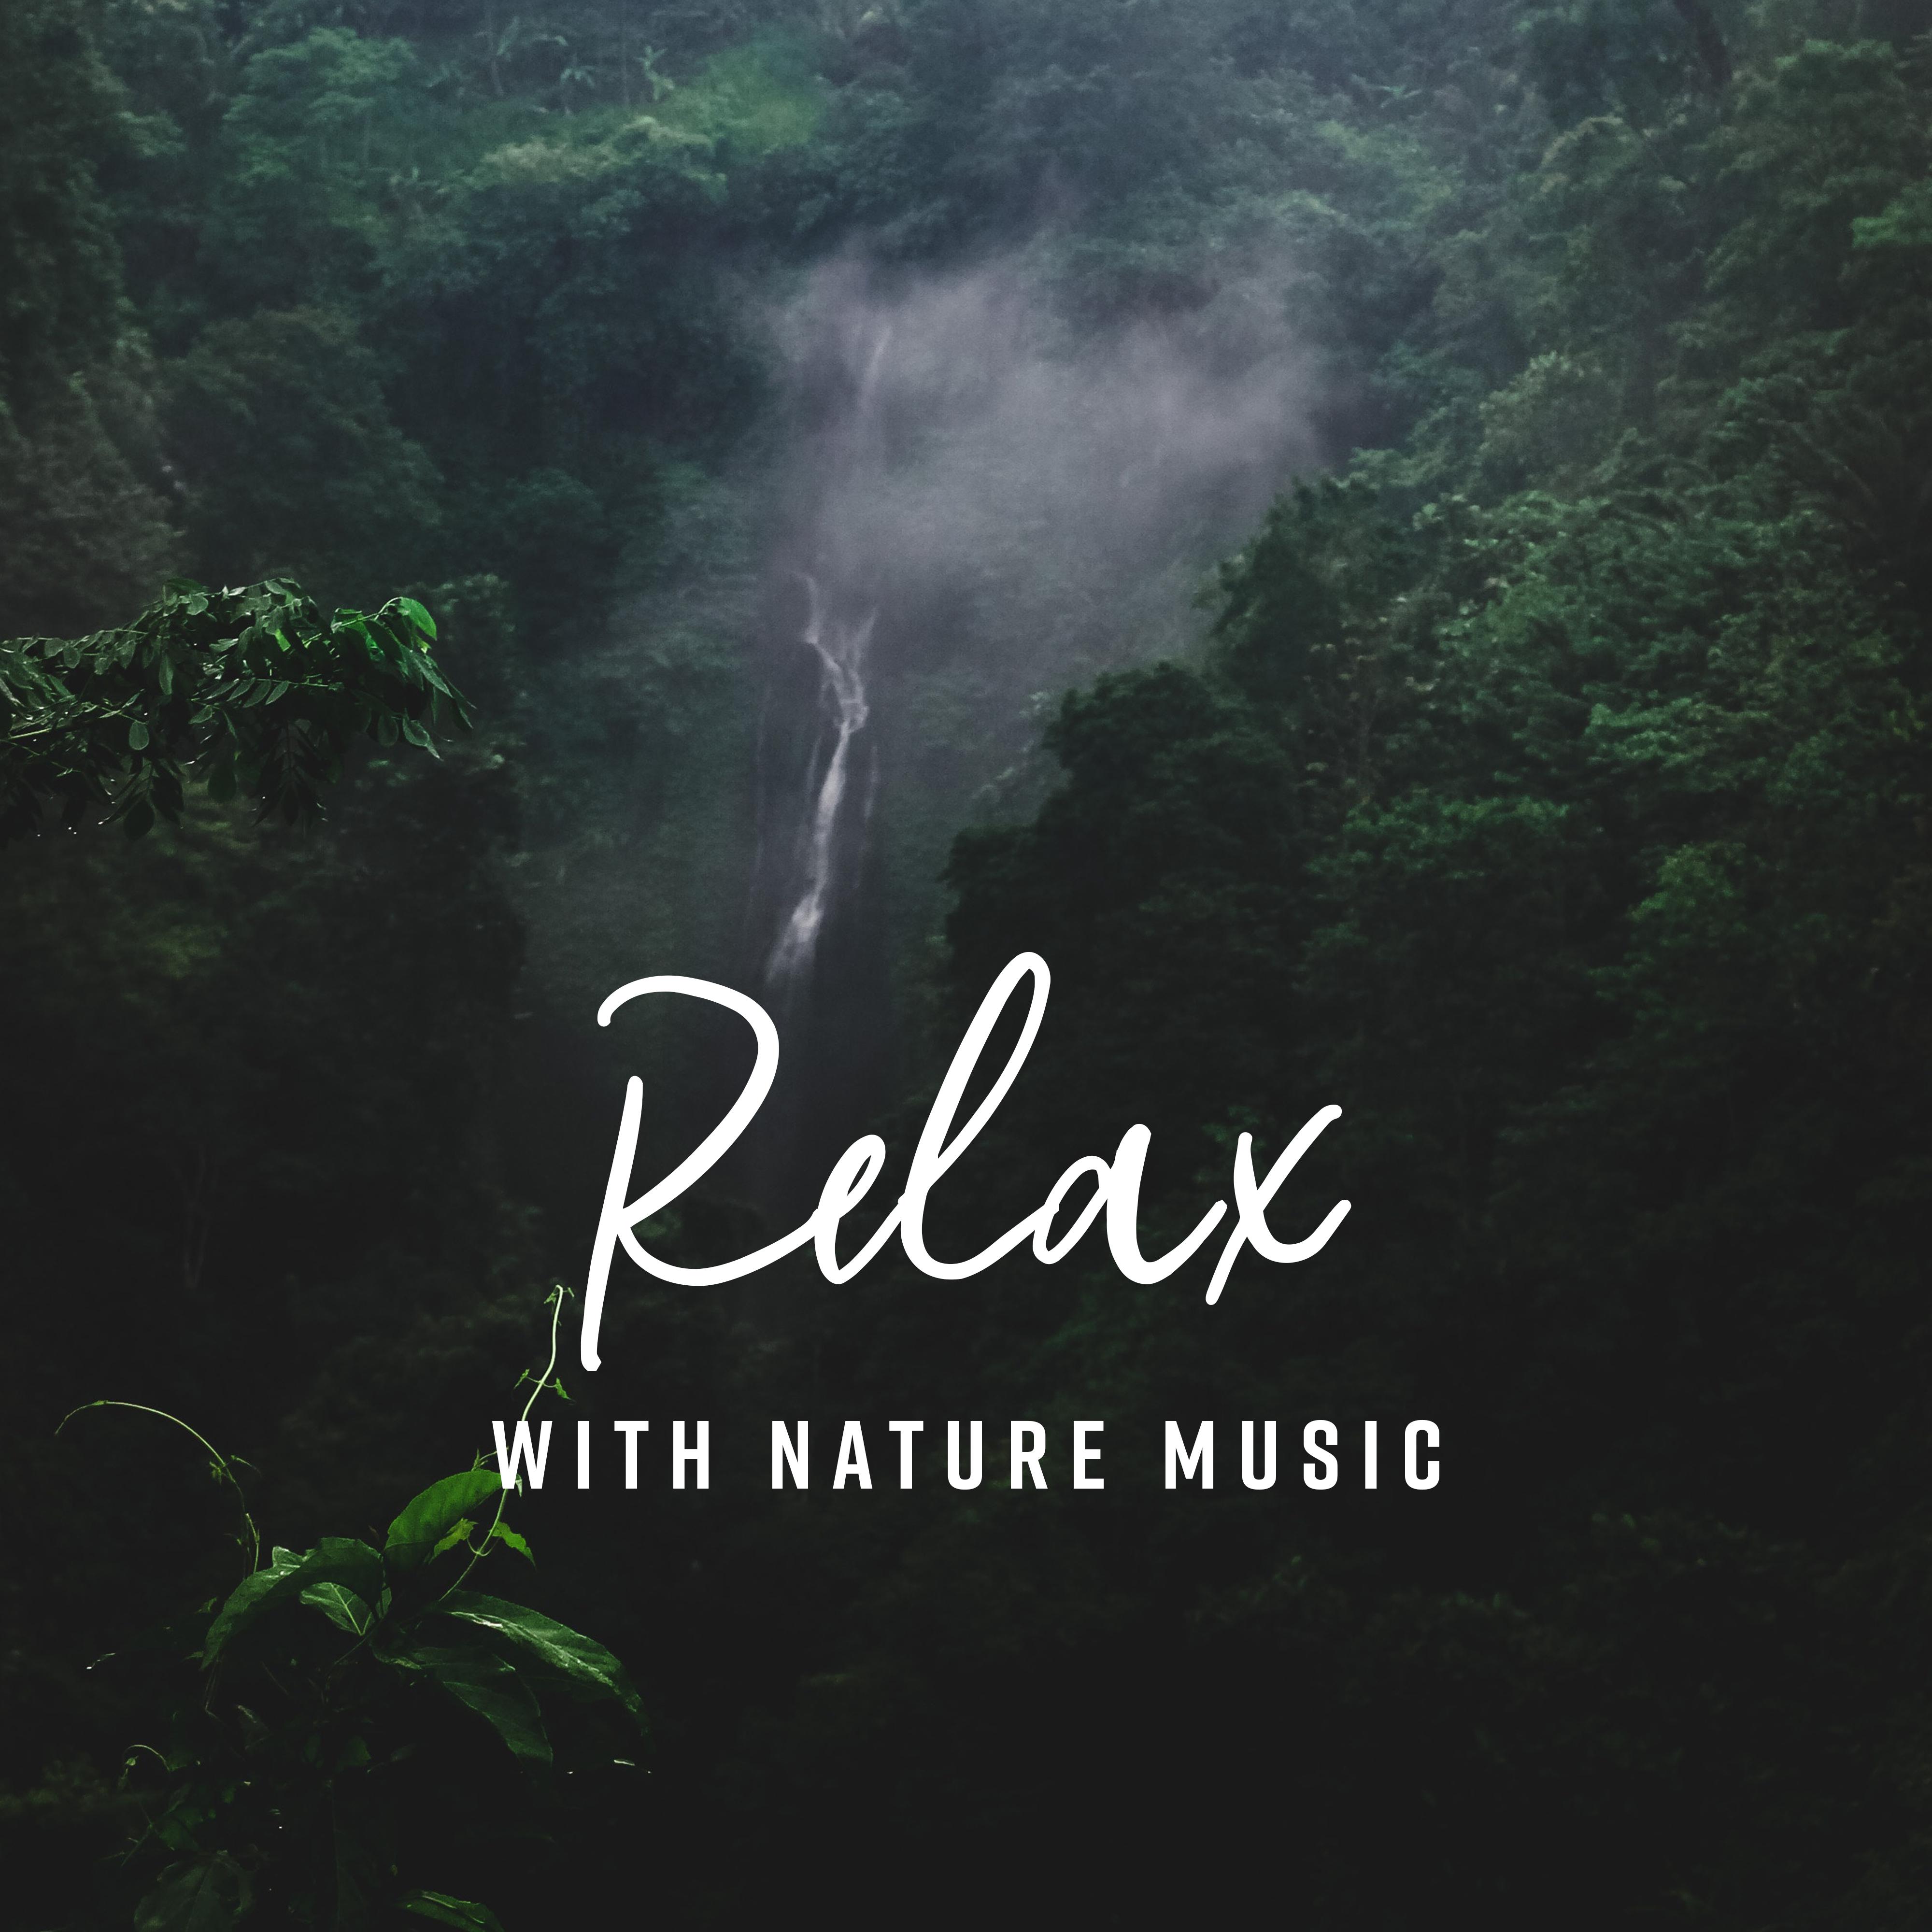 Relax with Nature Music  Relaxing Music Therapy, Stress Relief, 15 Nature Sounds for Sleep, Inner Balance, Full Concentration, Zen, Sounds of Nature